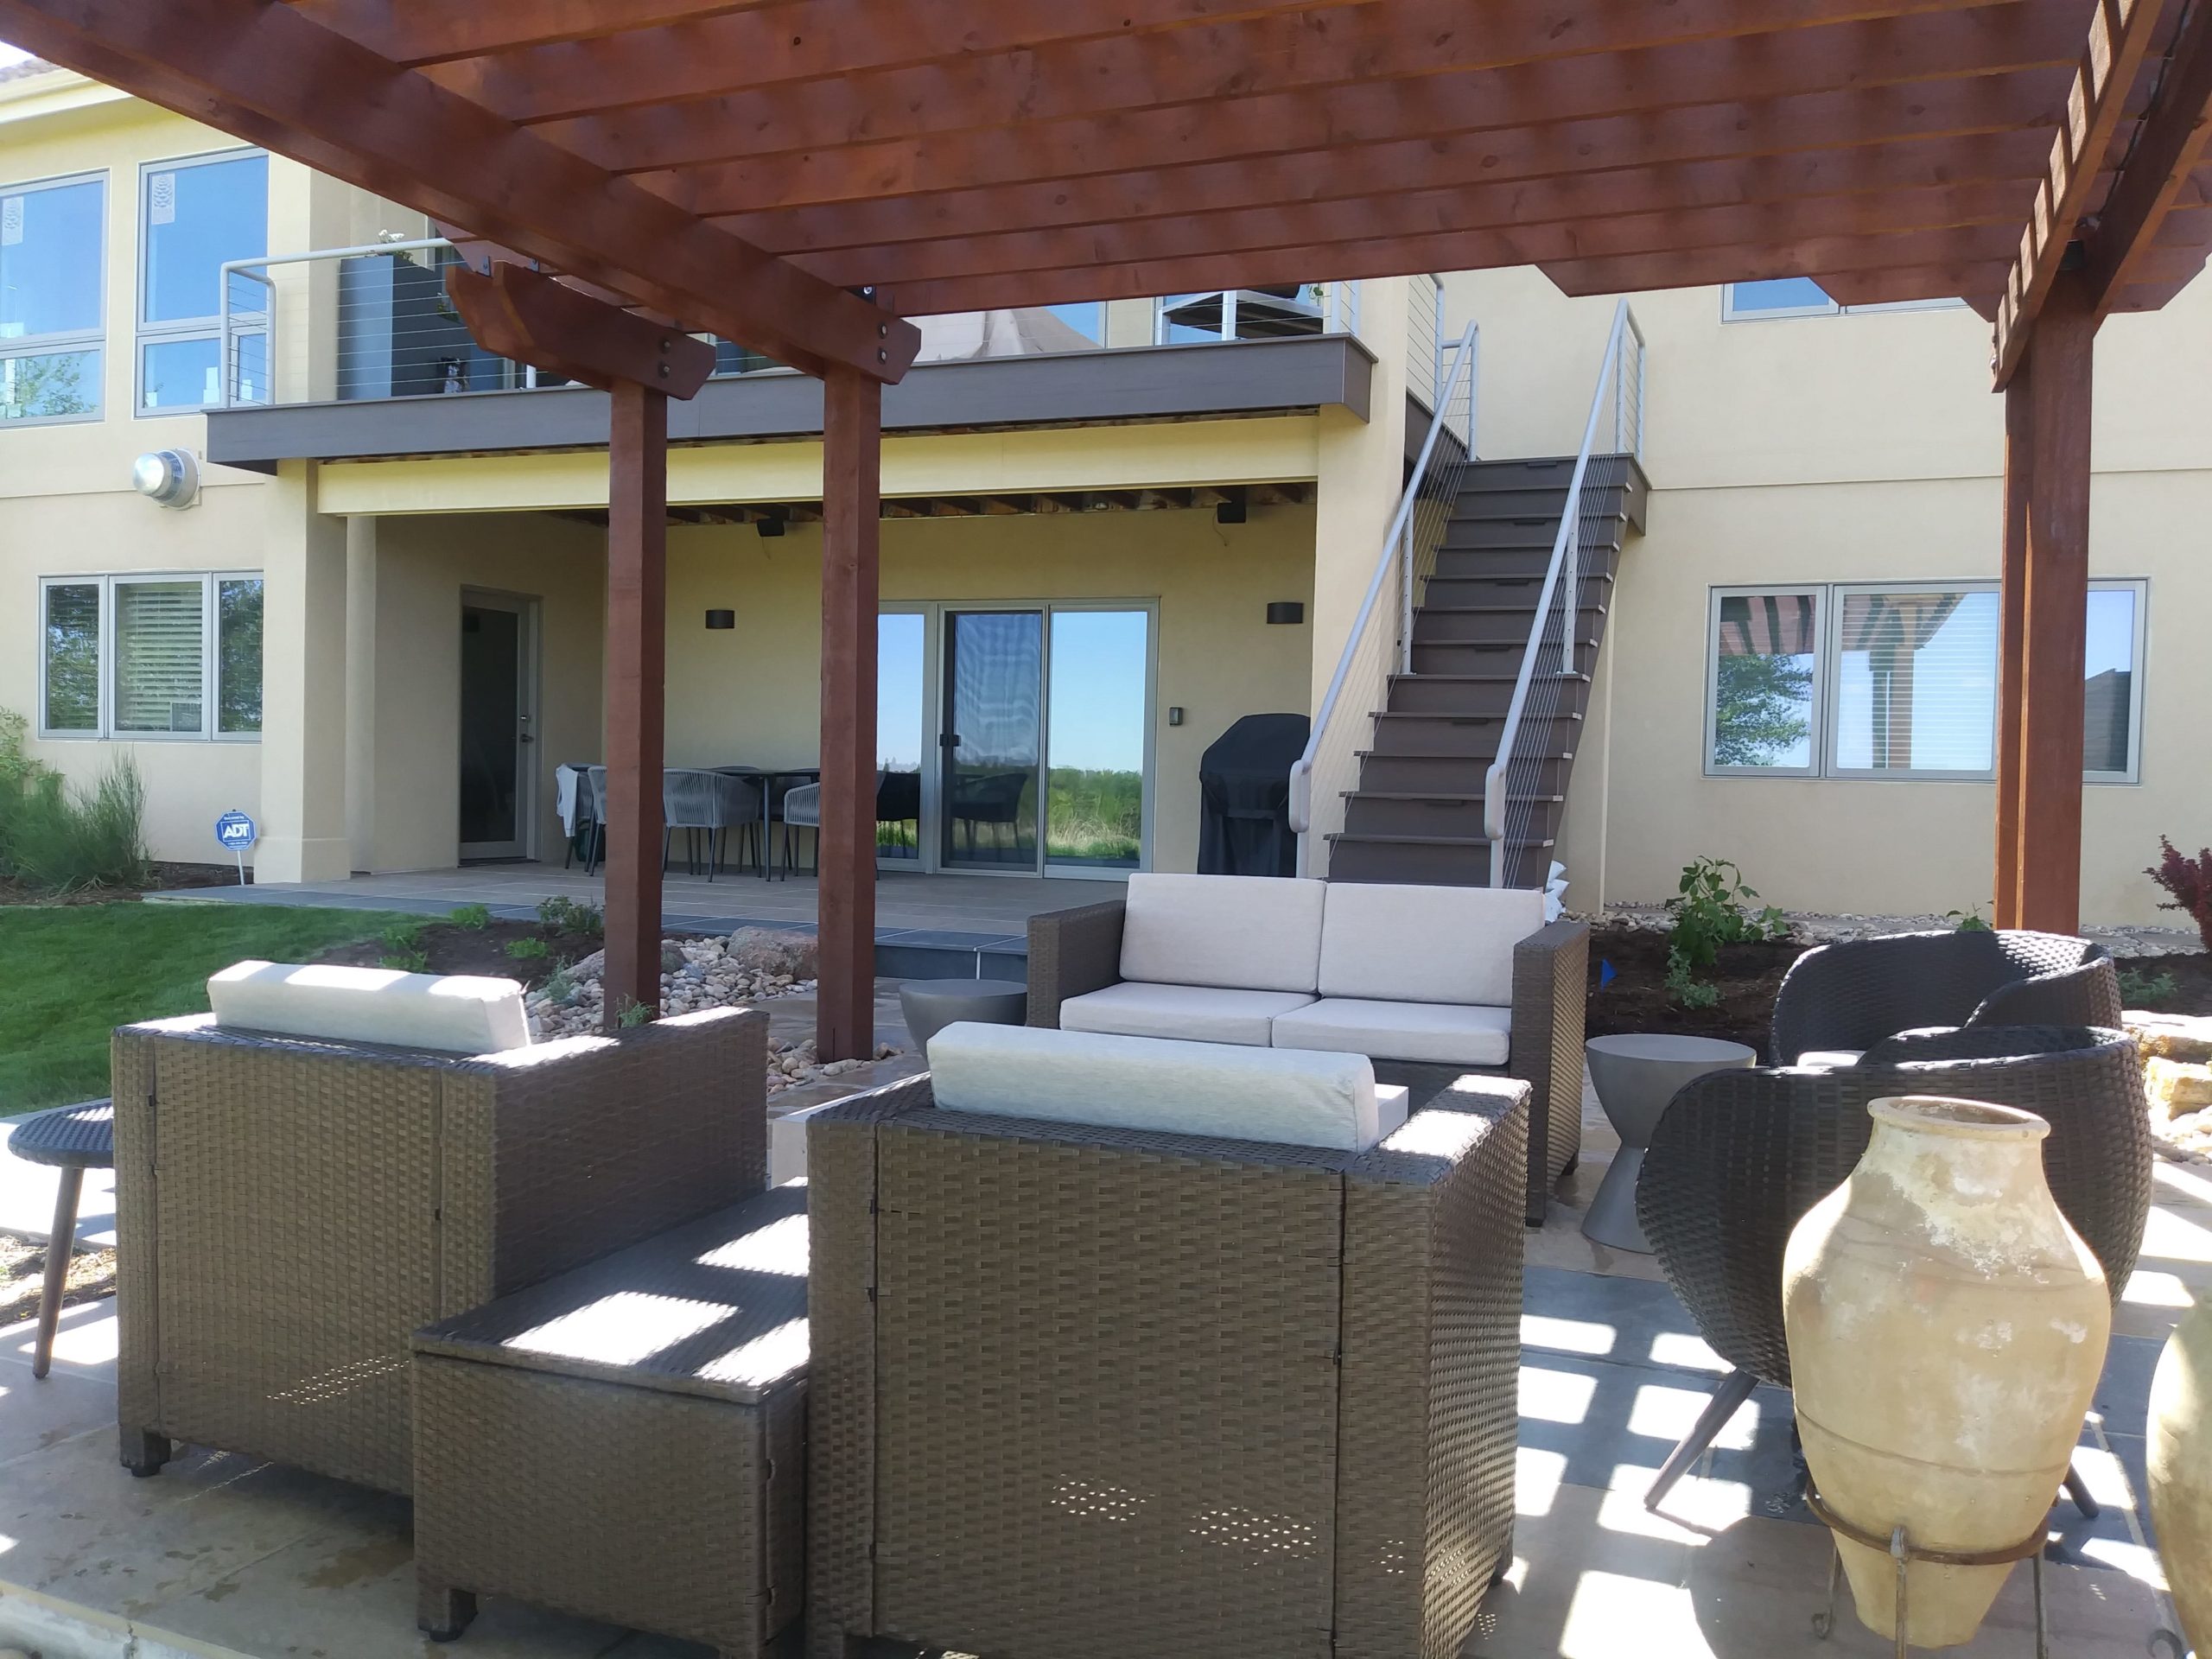 Concrete patio with pergola over top of the seating area.